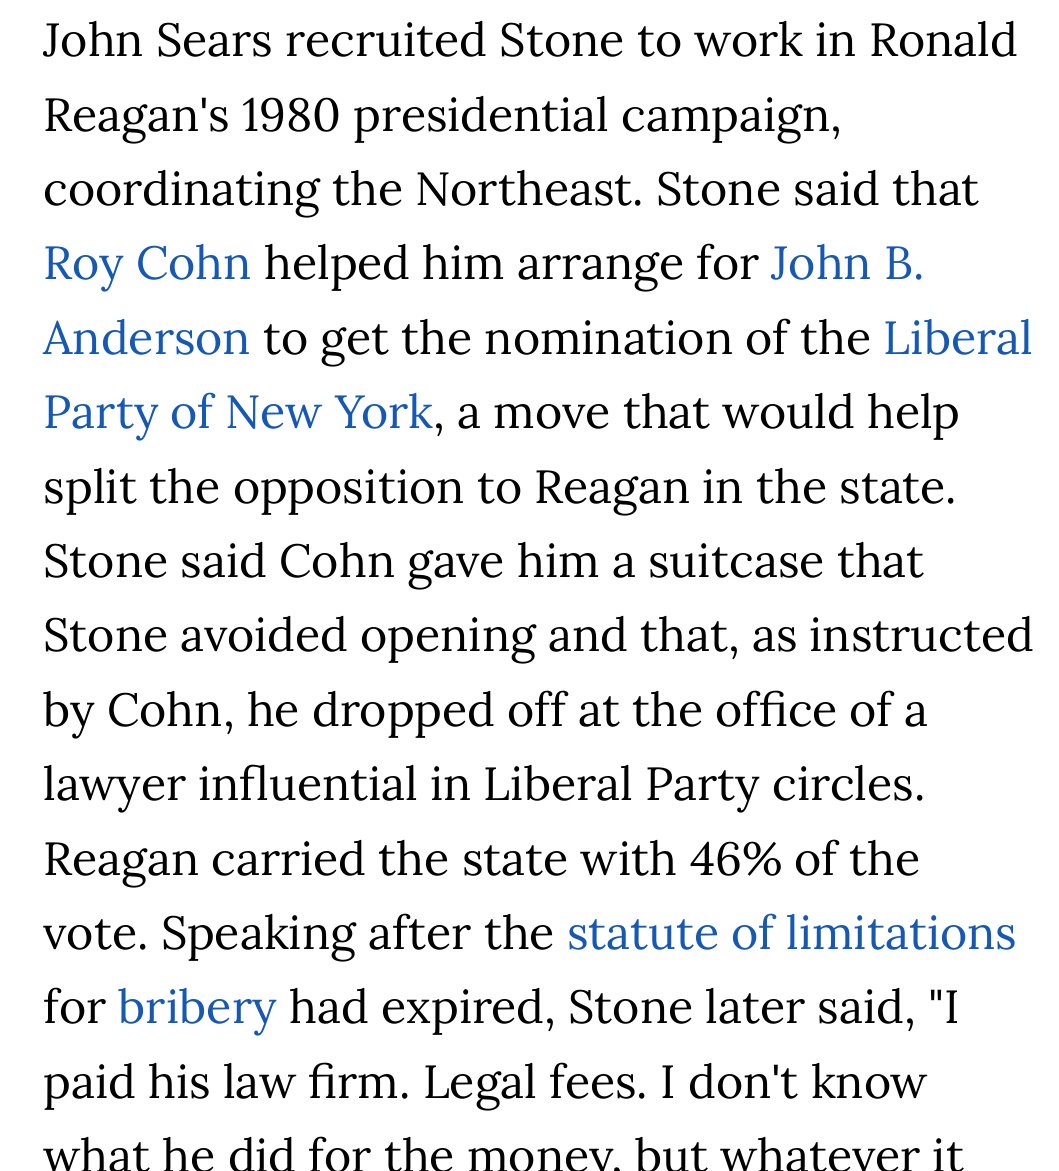 John Sears, Roy Cohn, John B. Anderson, and Roger Stone's delivery of a suitcase...
#ReaganCampaign